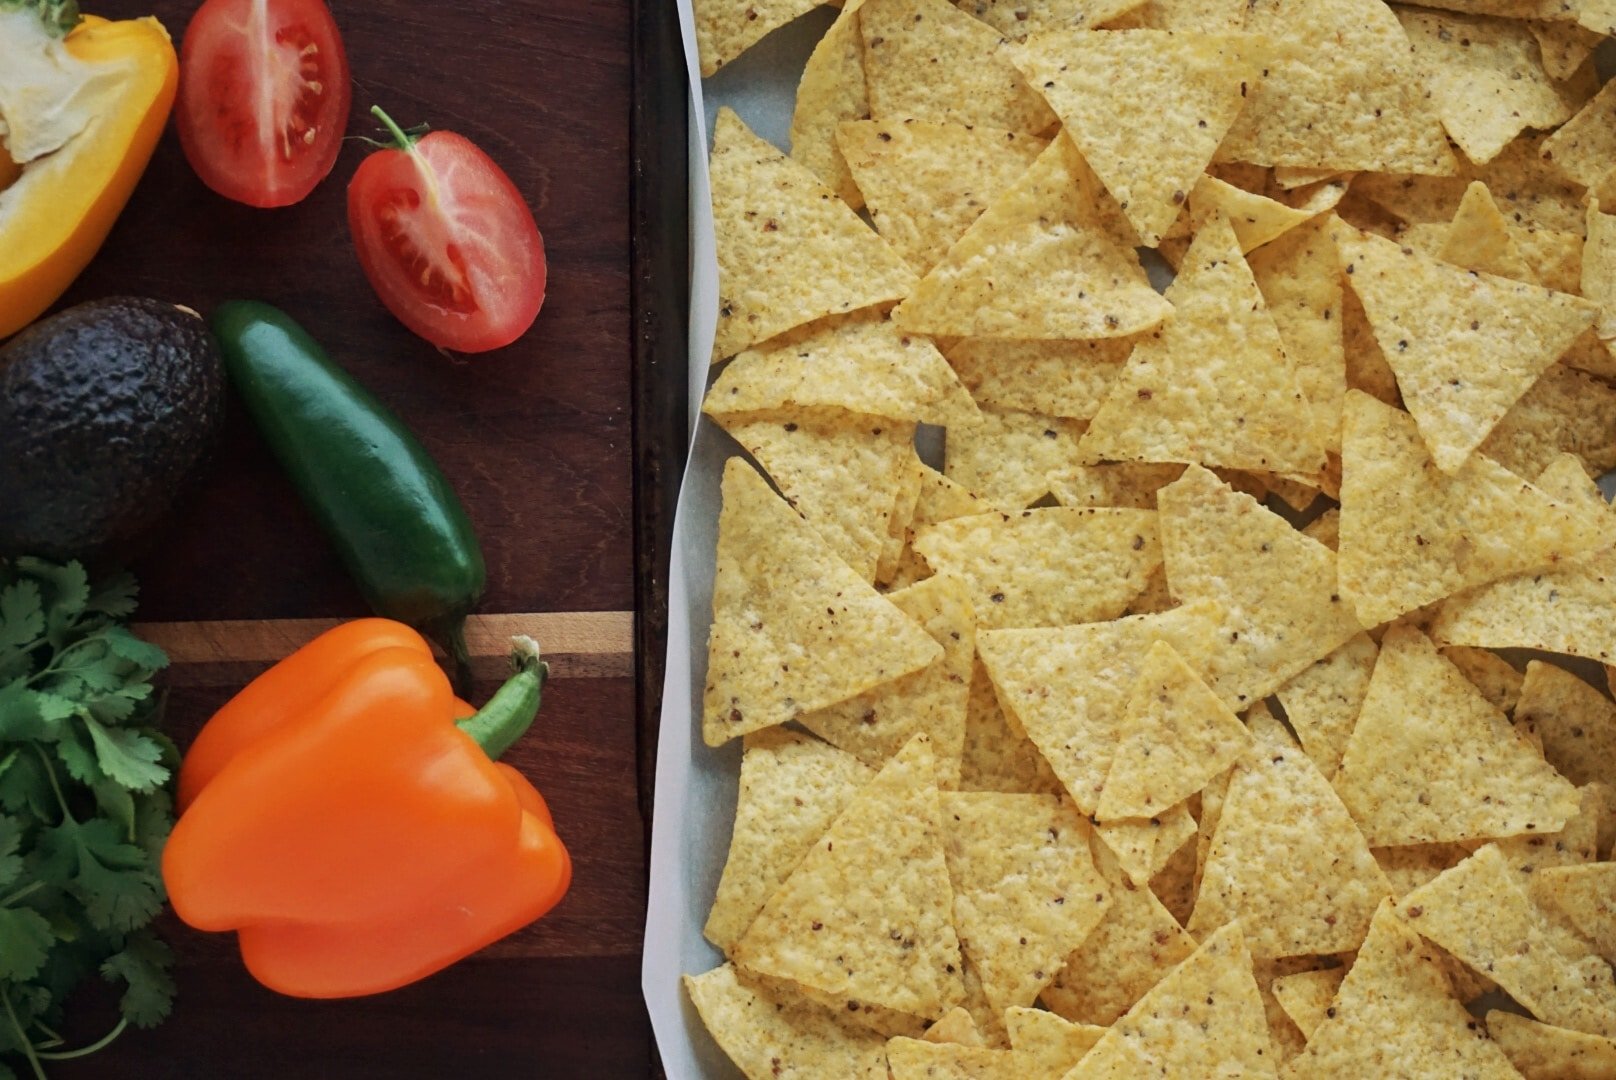 Tray of tortilla chips, peppers and tomatoes